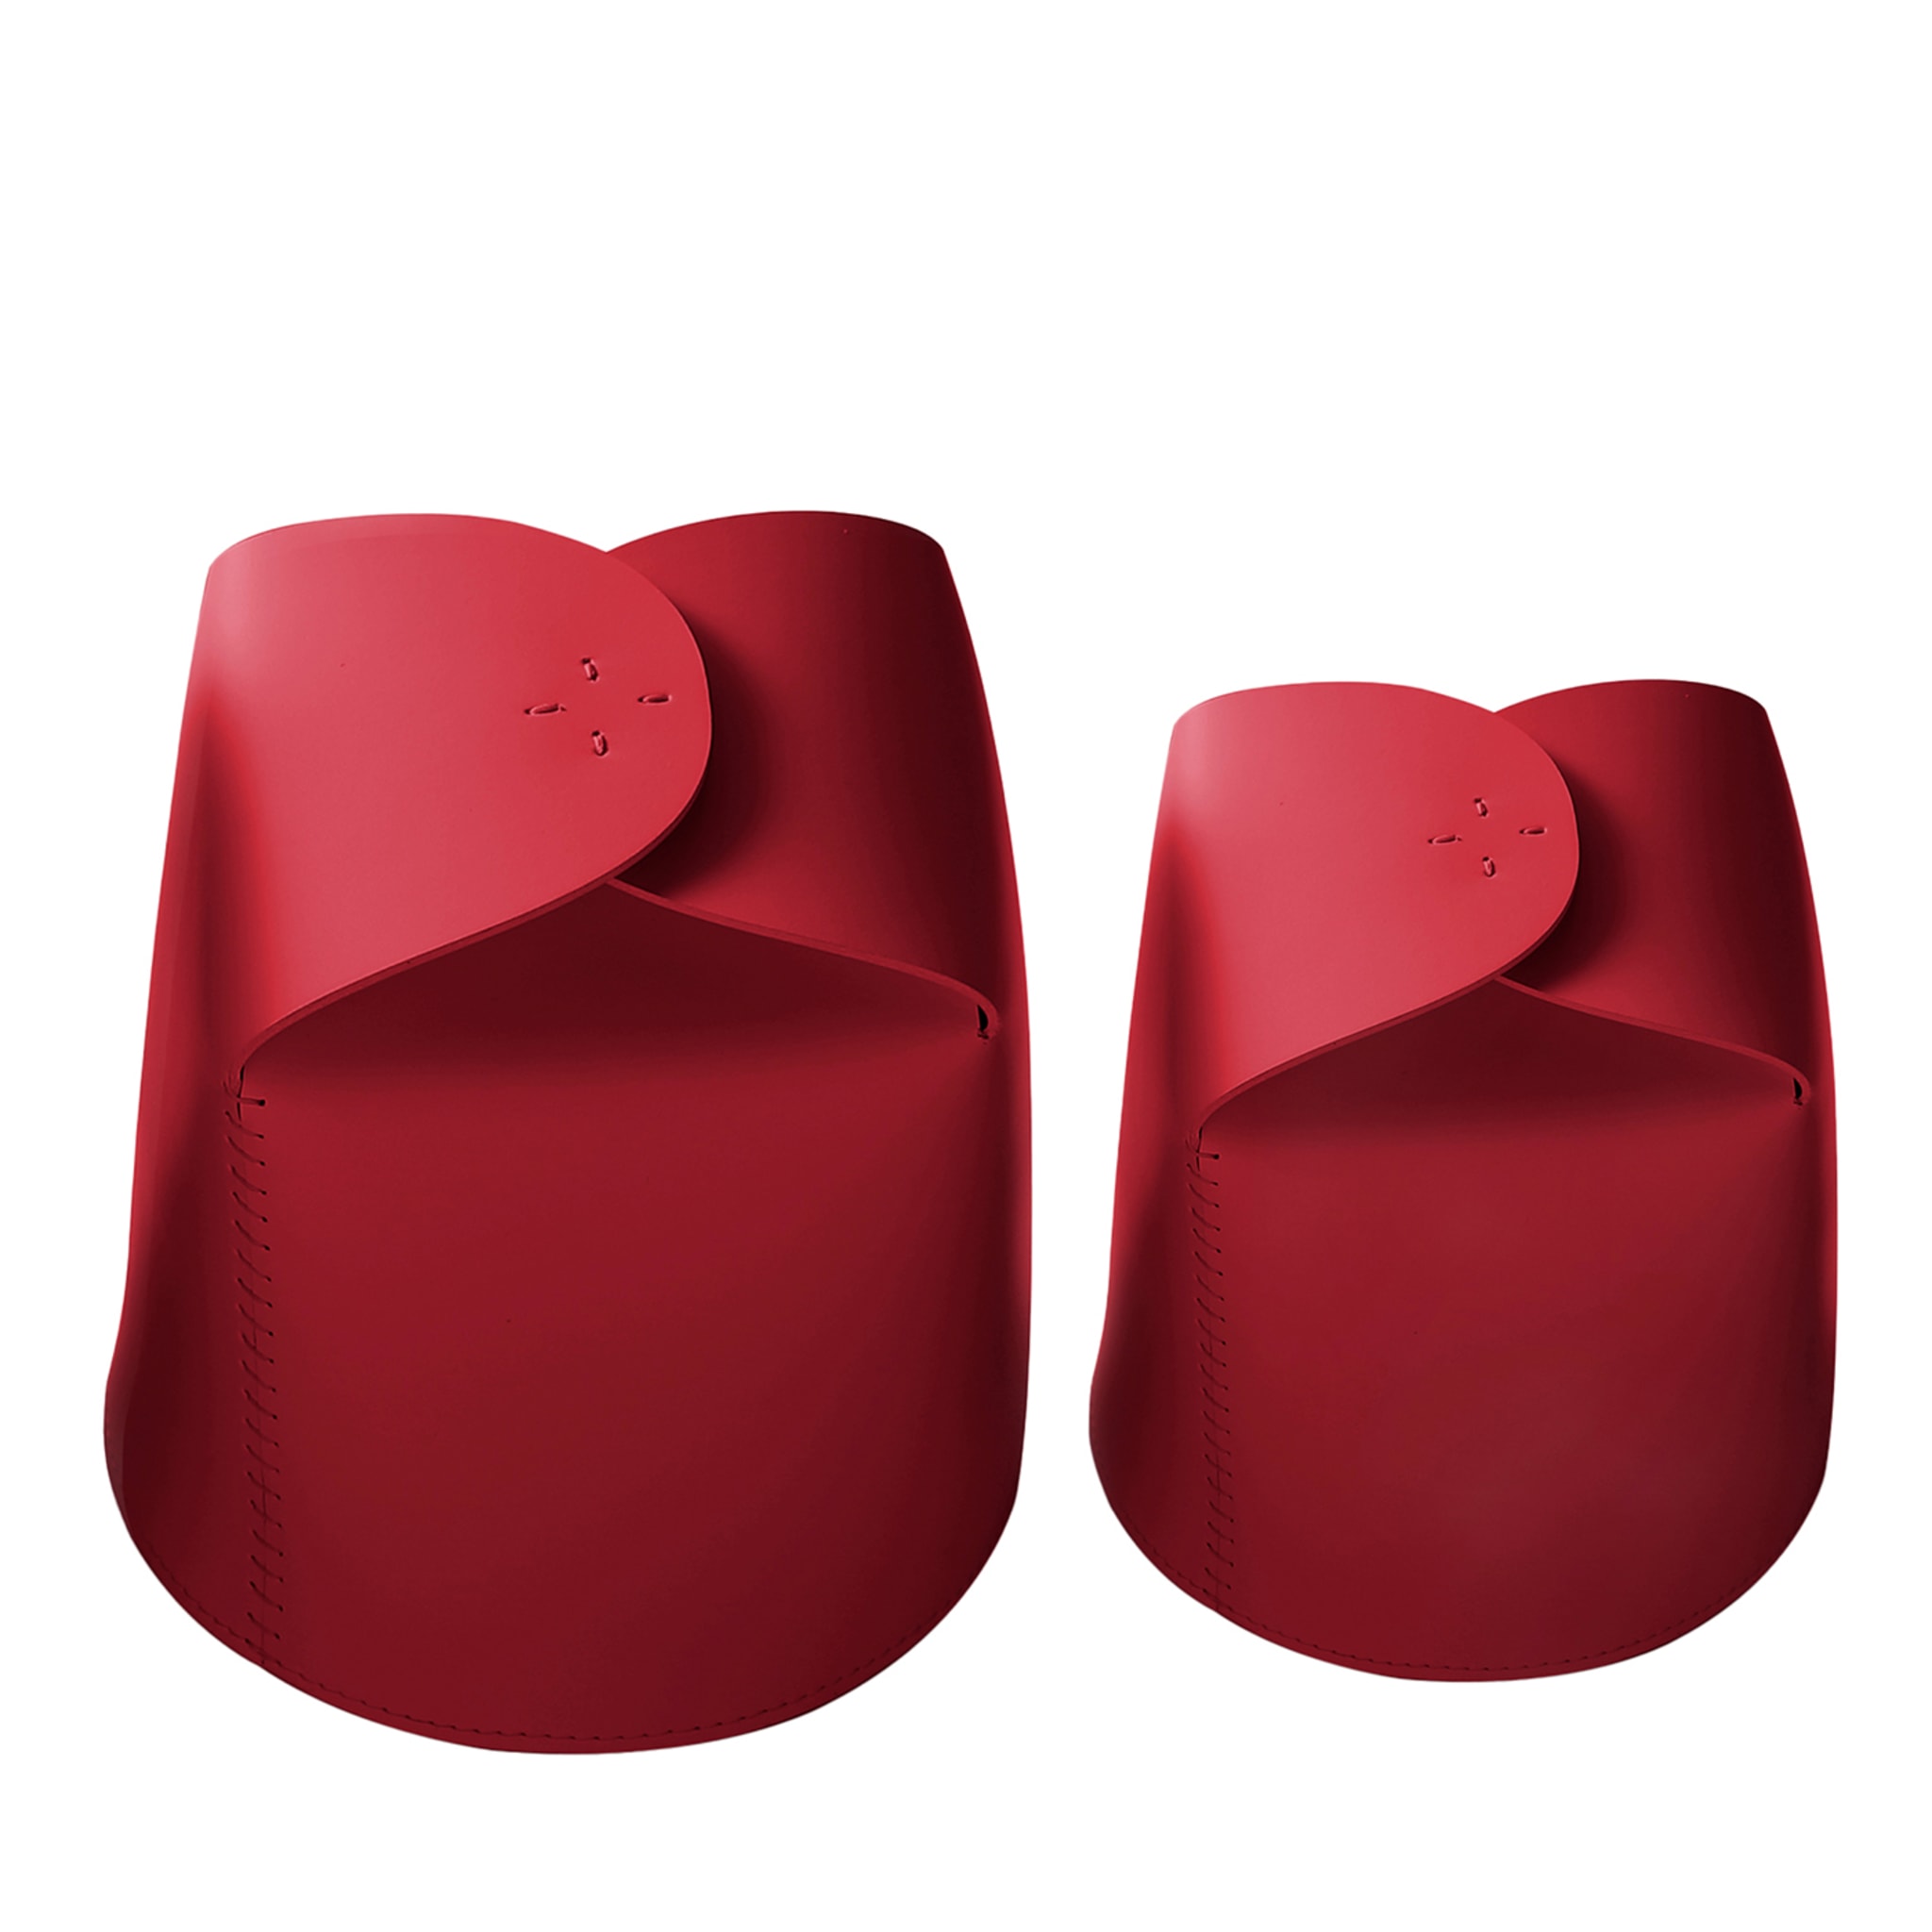 Set of 2 Bloom Leather Red Basket by Viola Tonucci - Main view